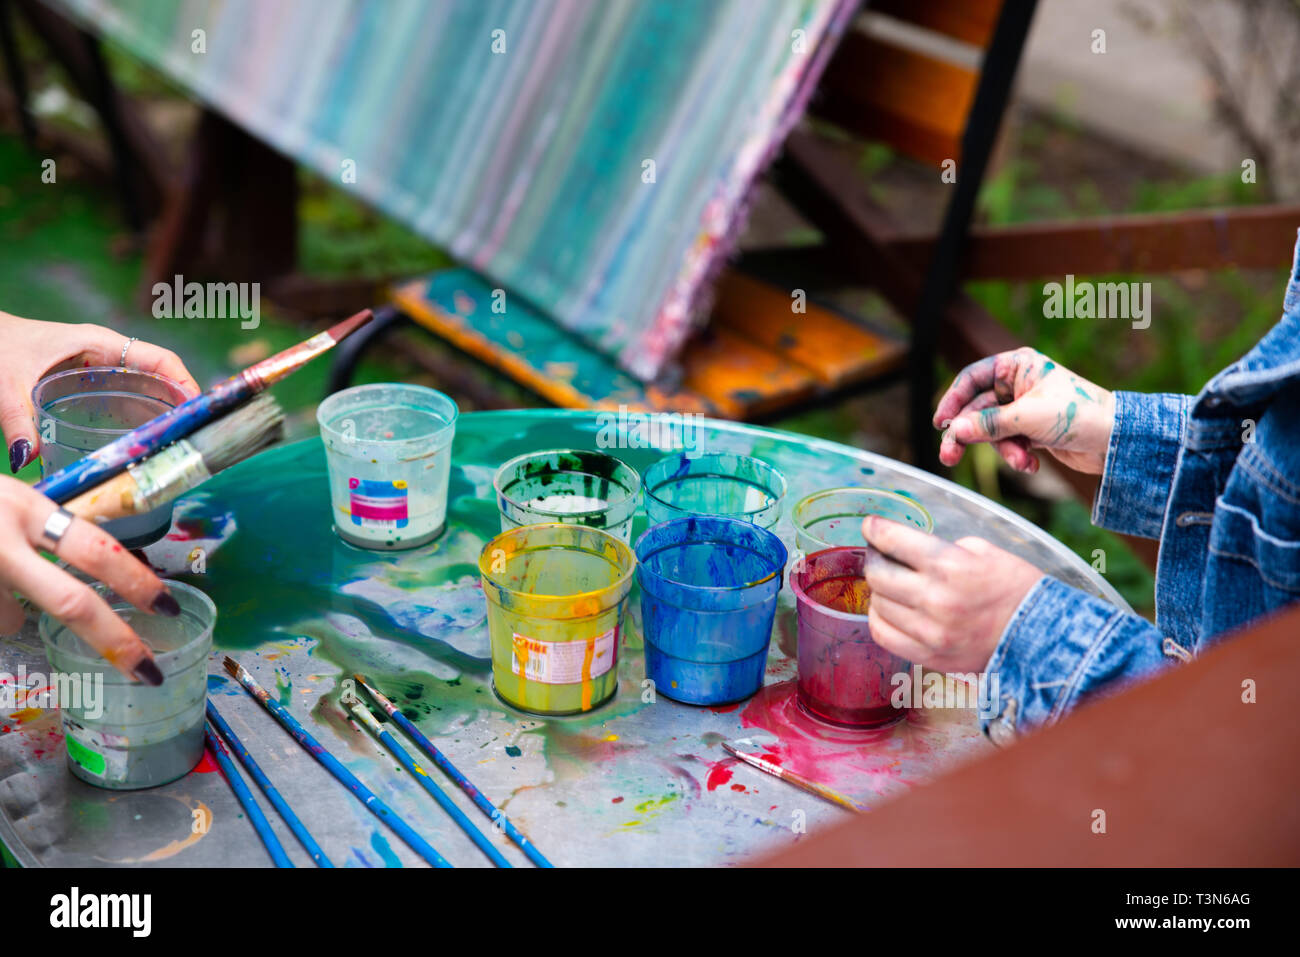 outdoors kinder garden children draw with paints. active leisure time for kids. having fun Stock Photo